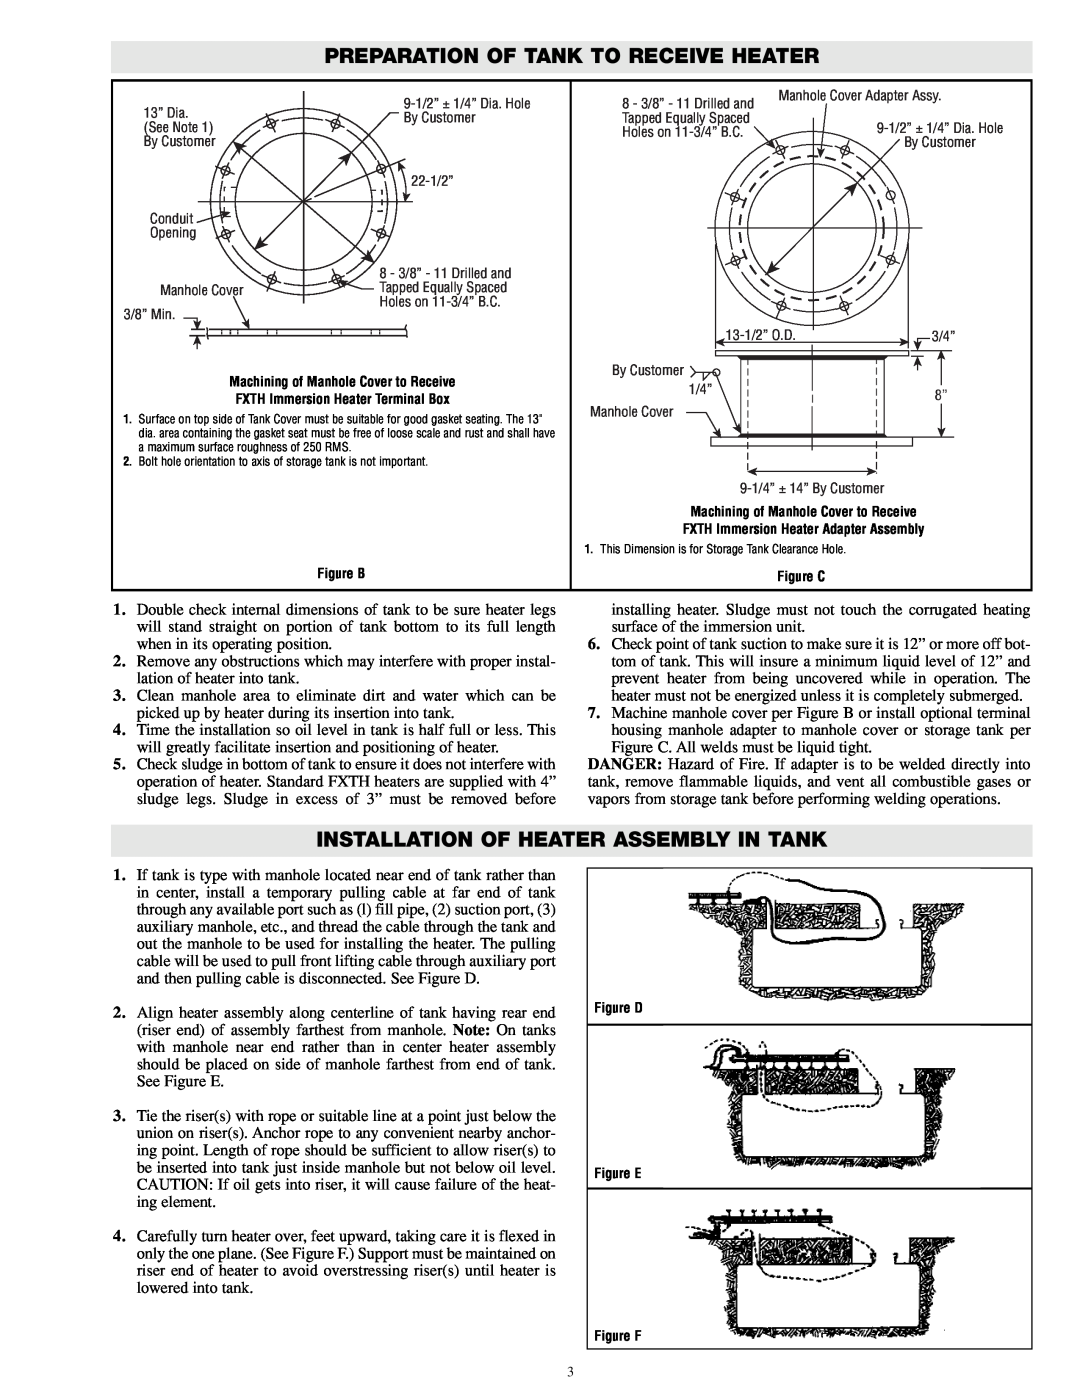 Chromalox PN401 specifications Preparation Of Tank To Receive Heater, Installation Of Heater Assembly In Tank, 3/4” 